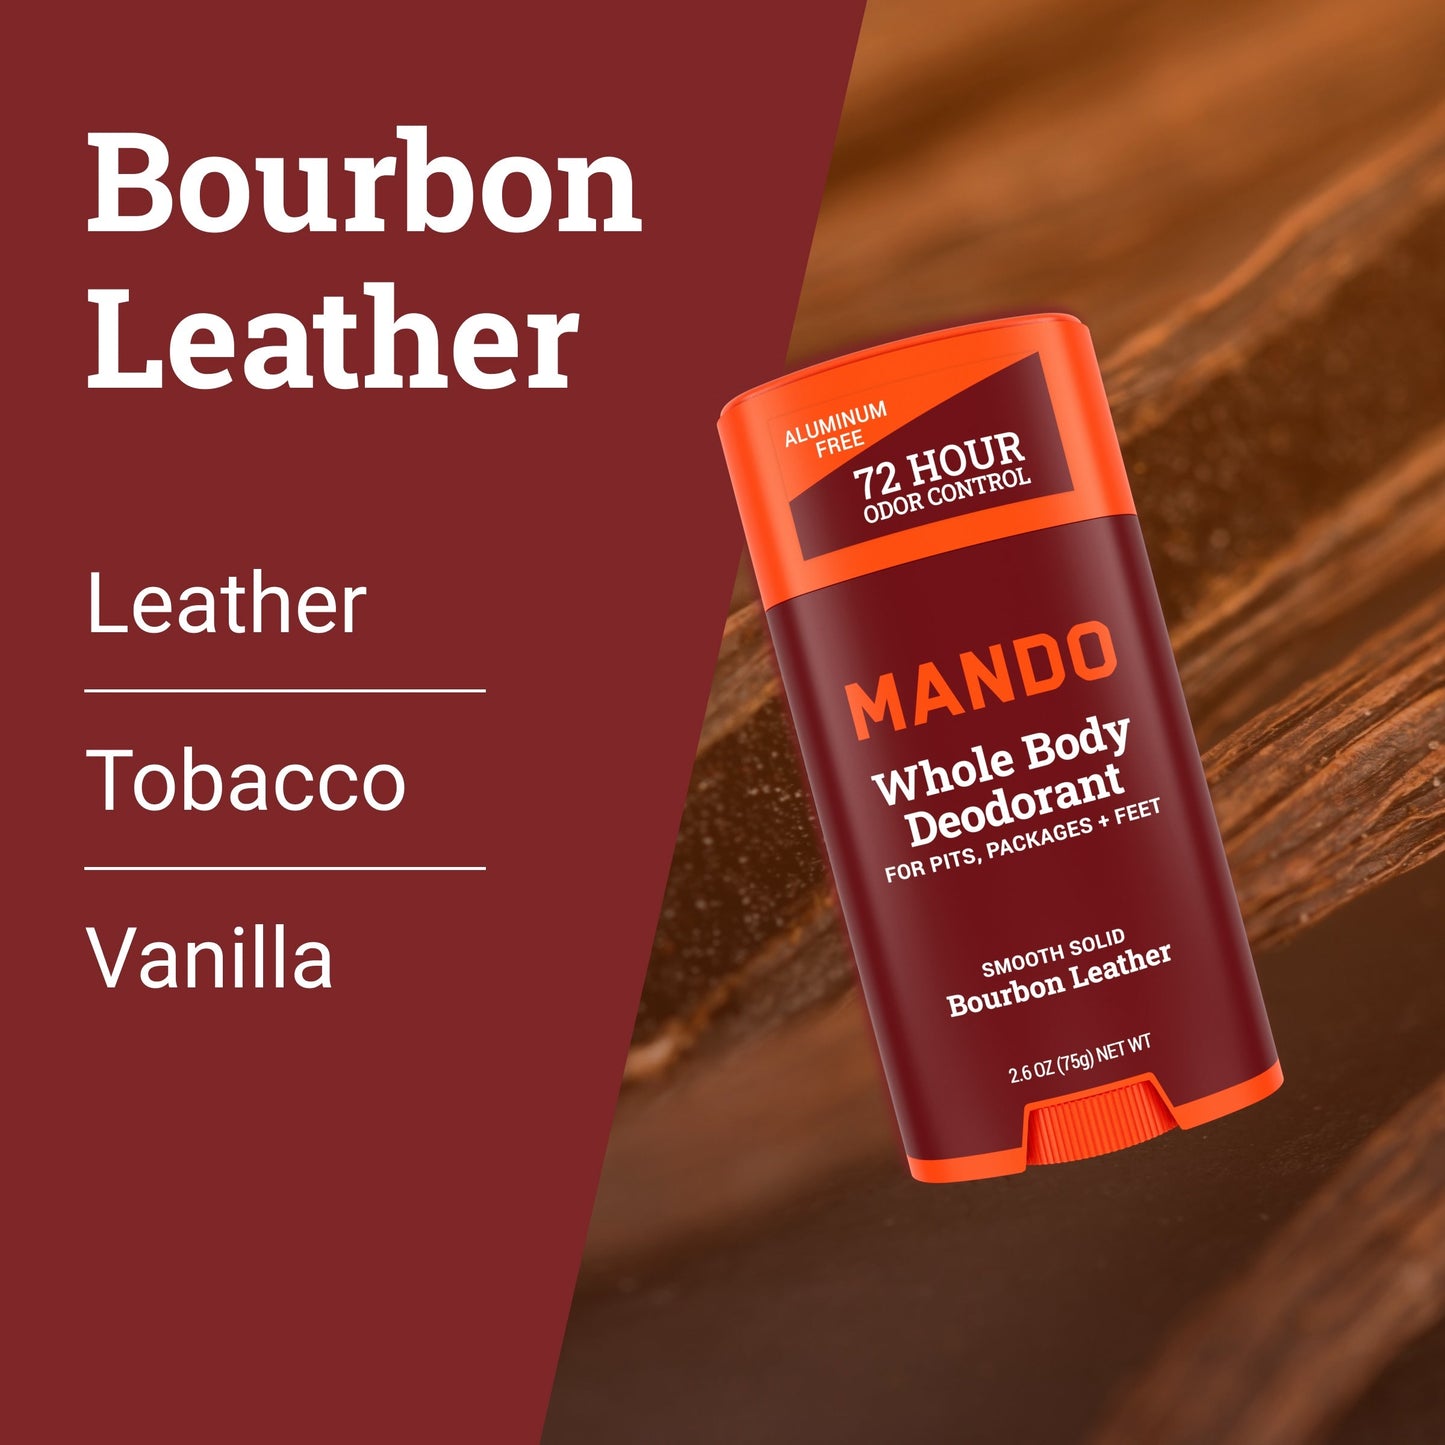 Mando smooth solid deodorant stick in bourbon leather with text: leather, tobacco, vanilla 